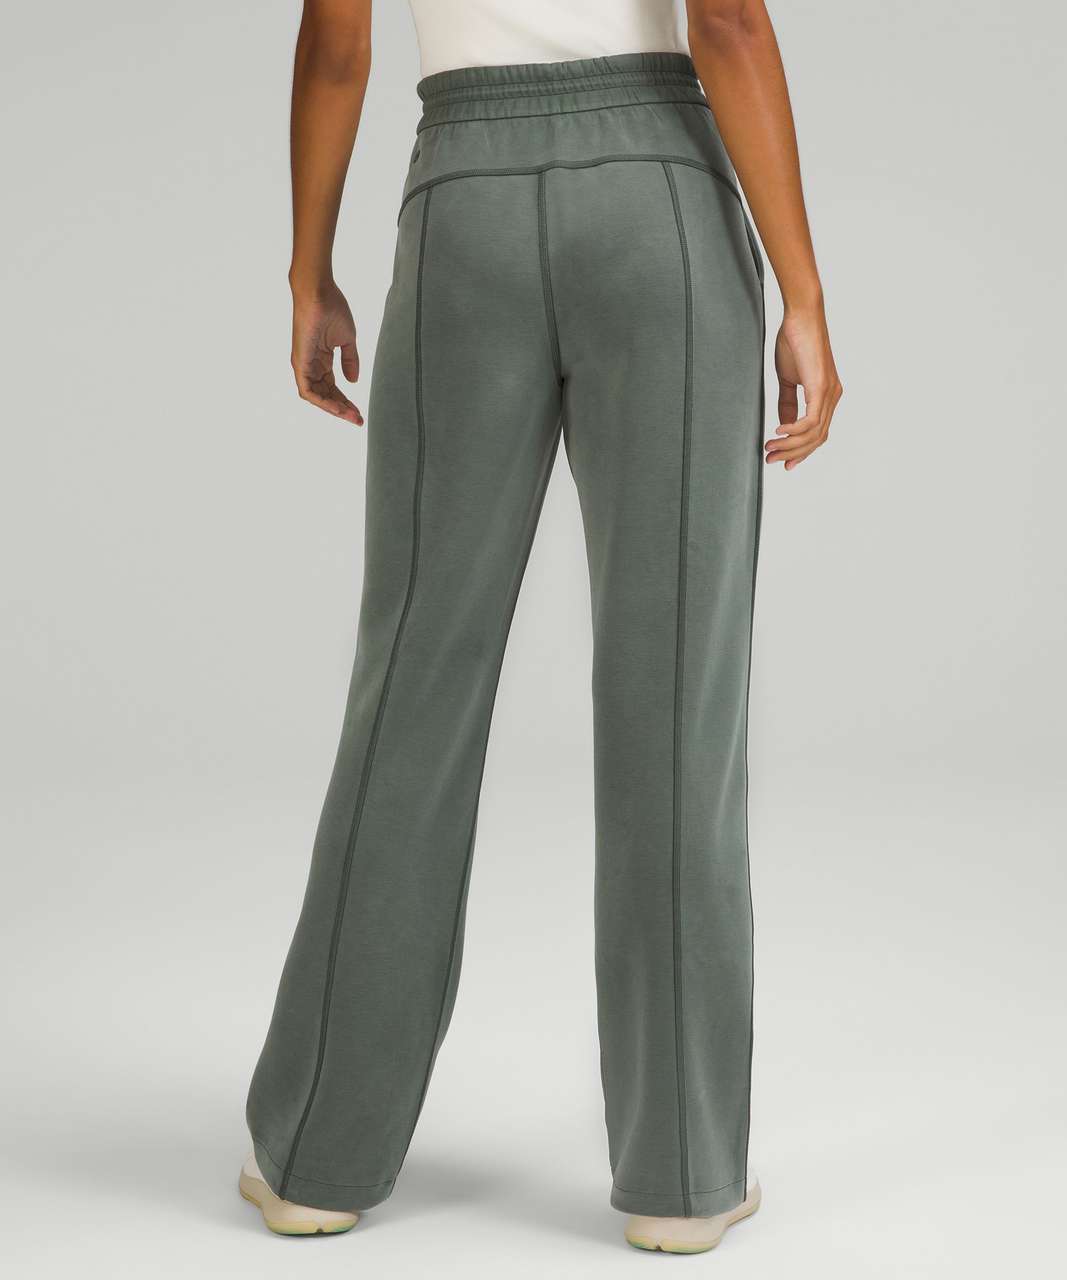 Lululemon Stretch High-Rise Pant 7/8 LengthSmoked Spruce Women's 6 Olive